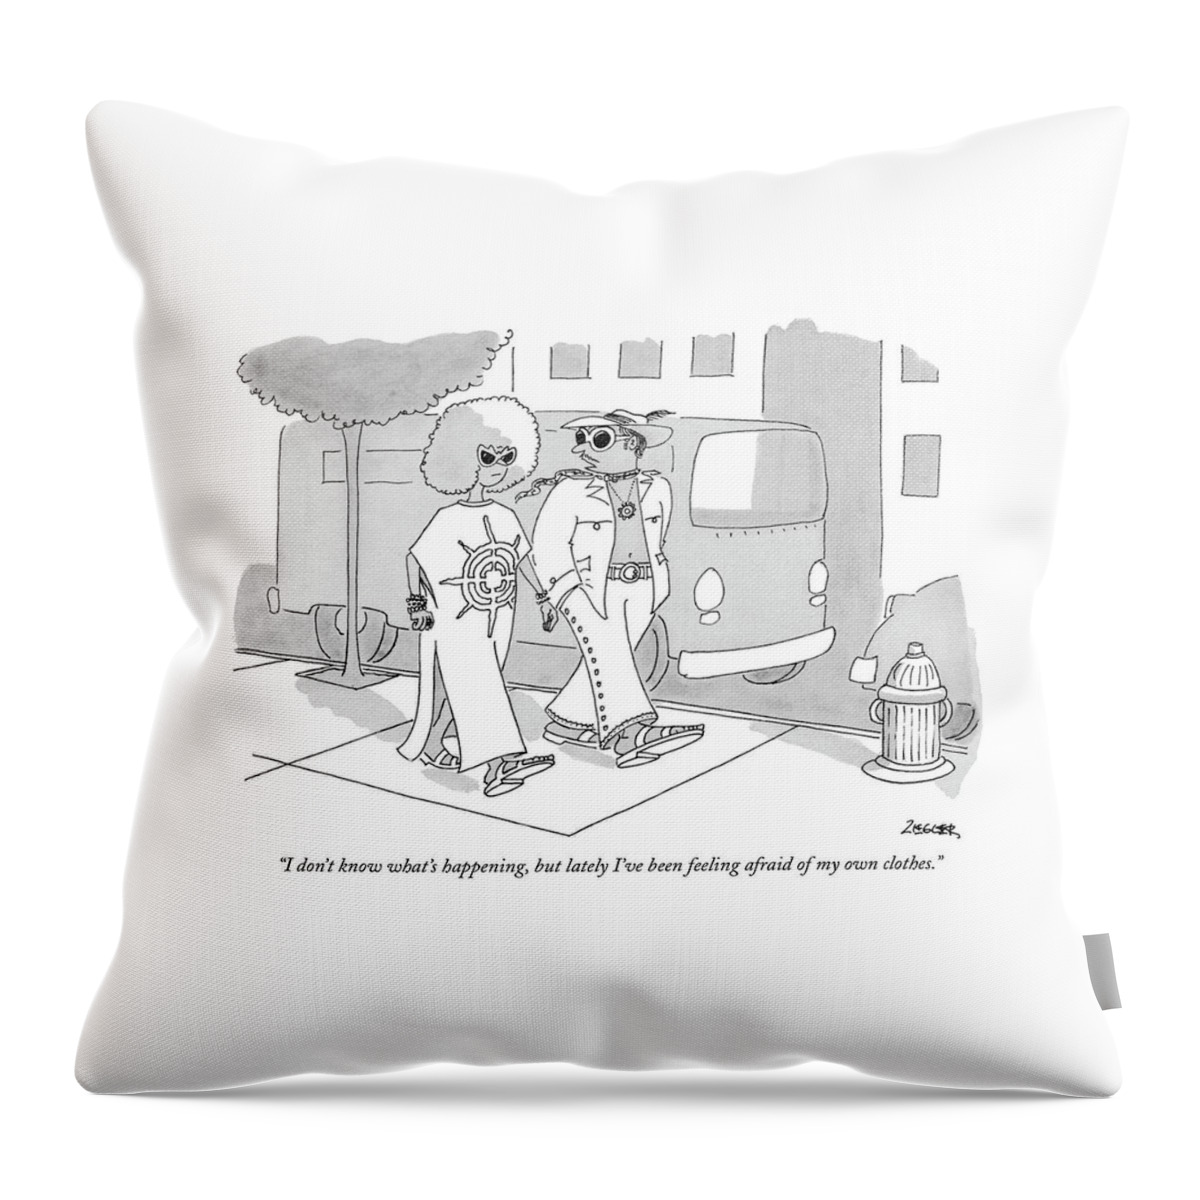 I Don't Know What's Happening Throw Pillow